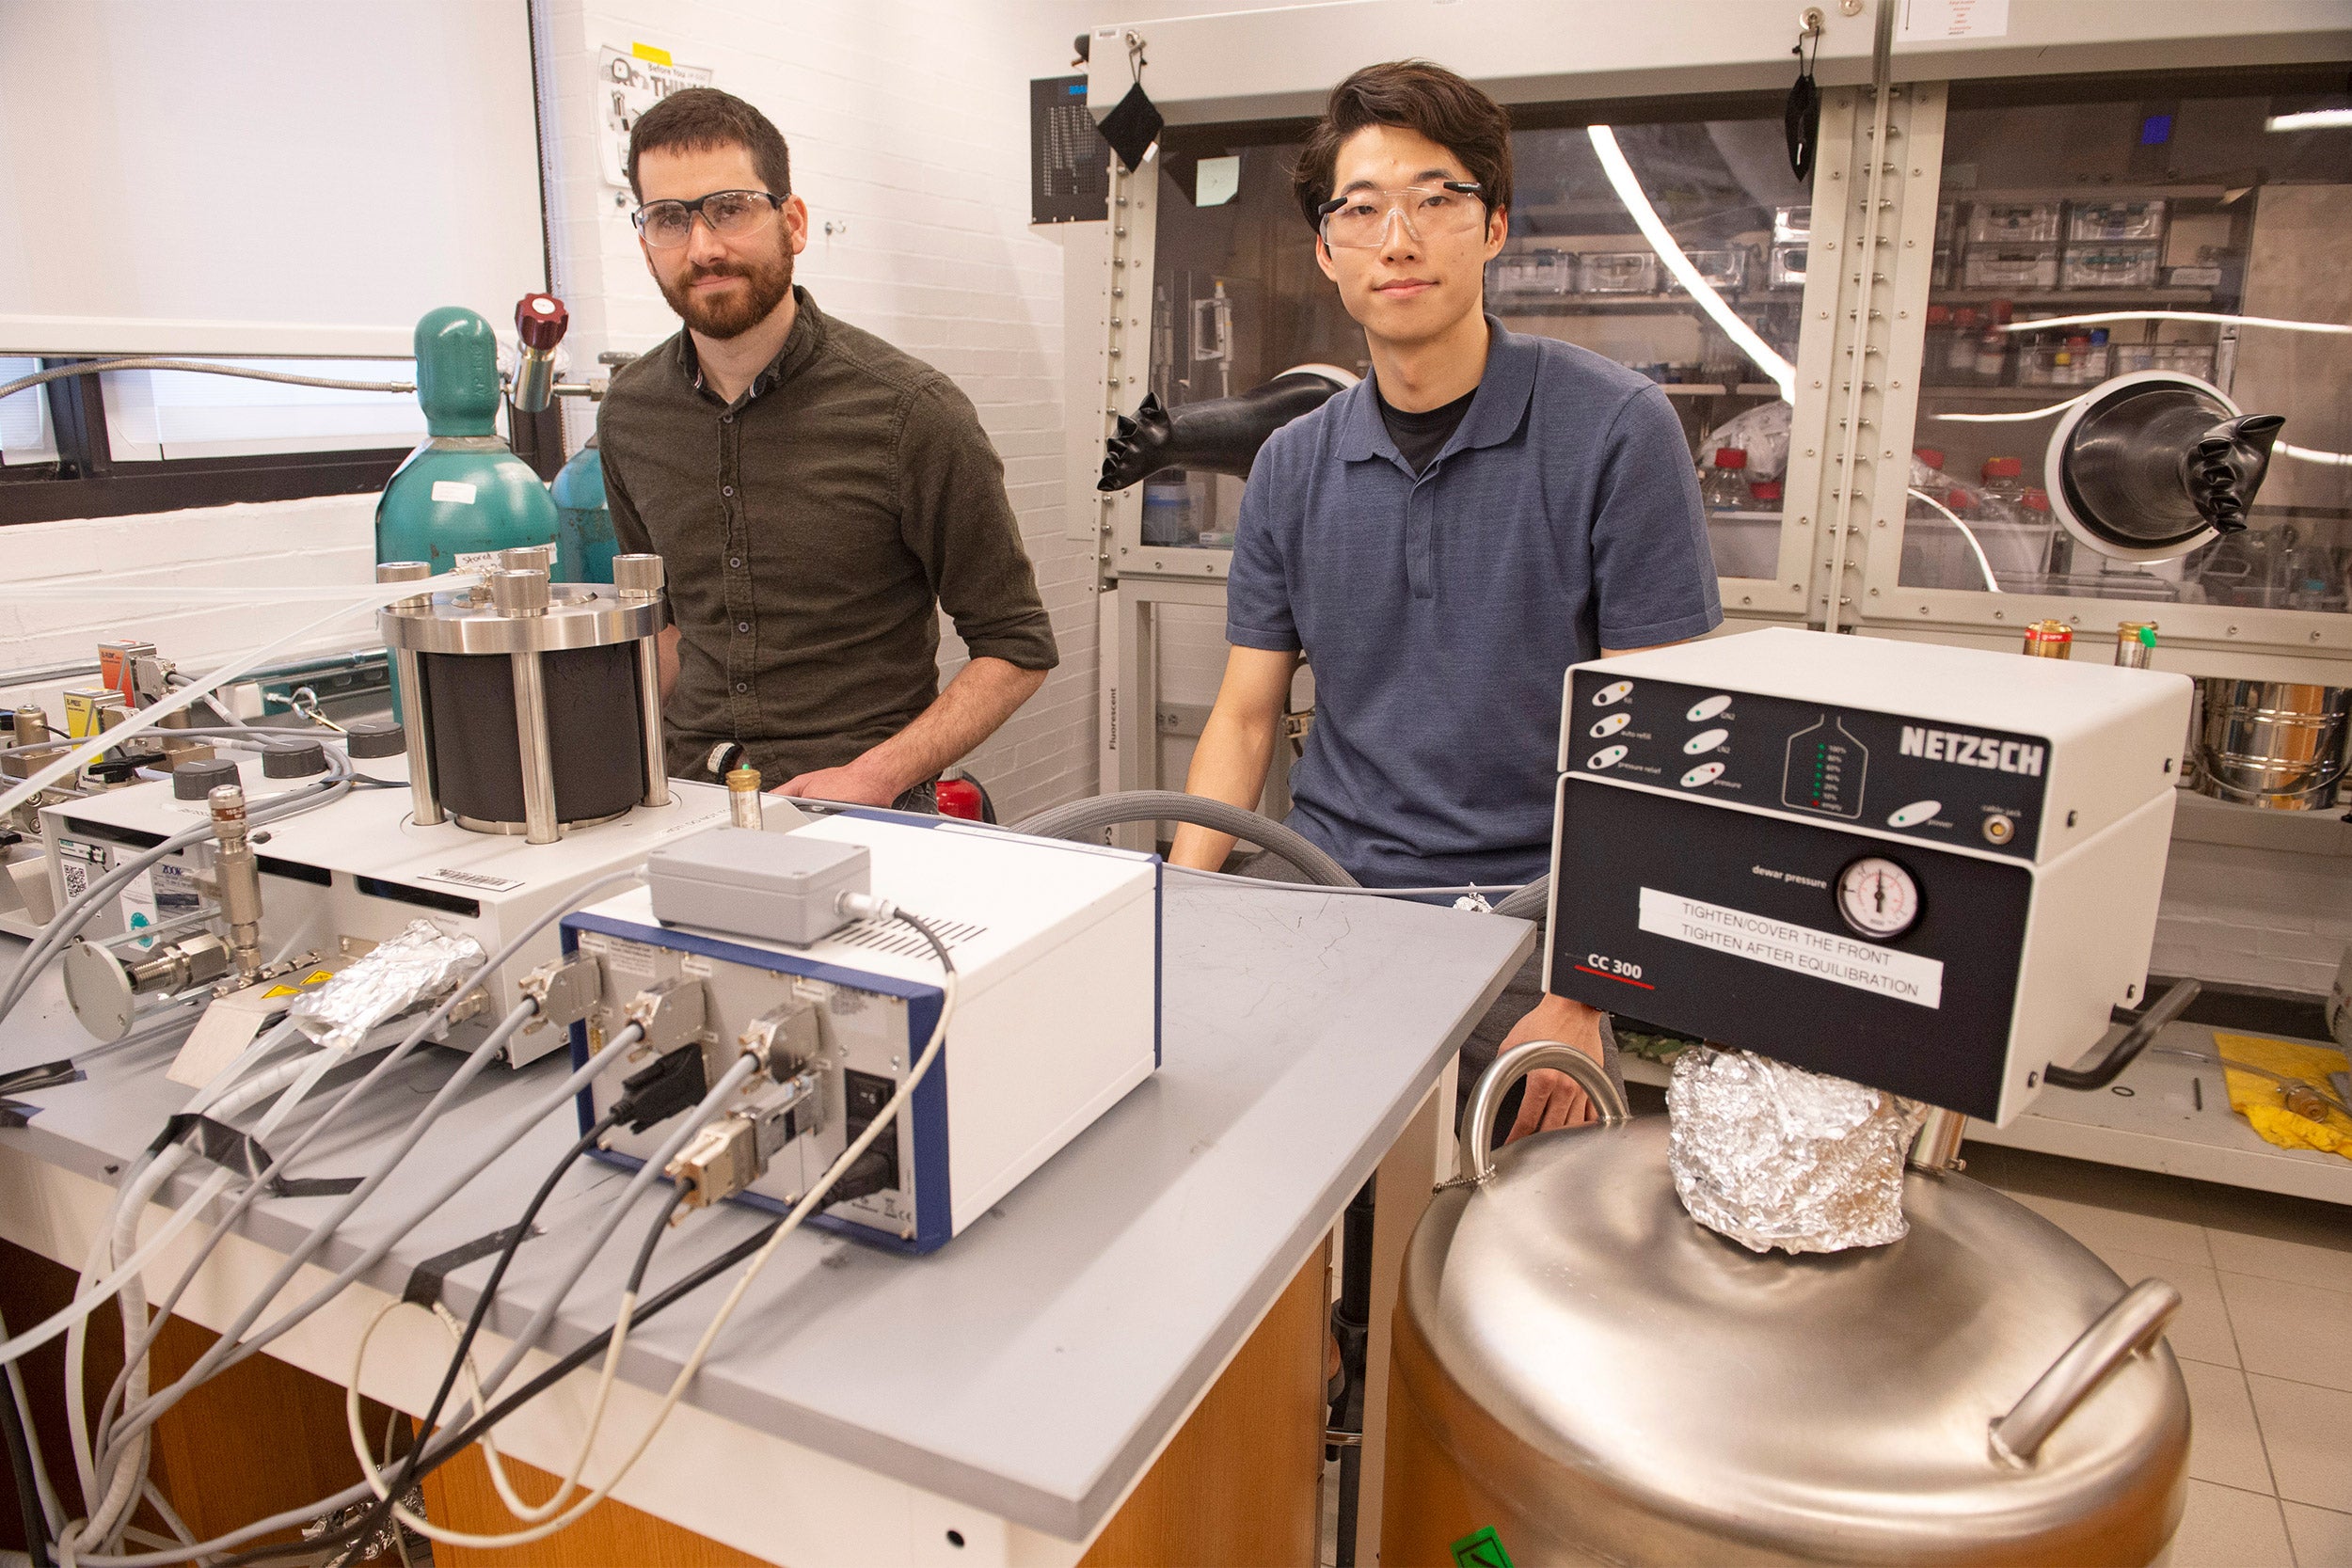 Assistant Professor of Chemistry Jarad Mason and co-author Jinyoung Seo